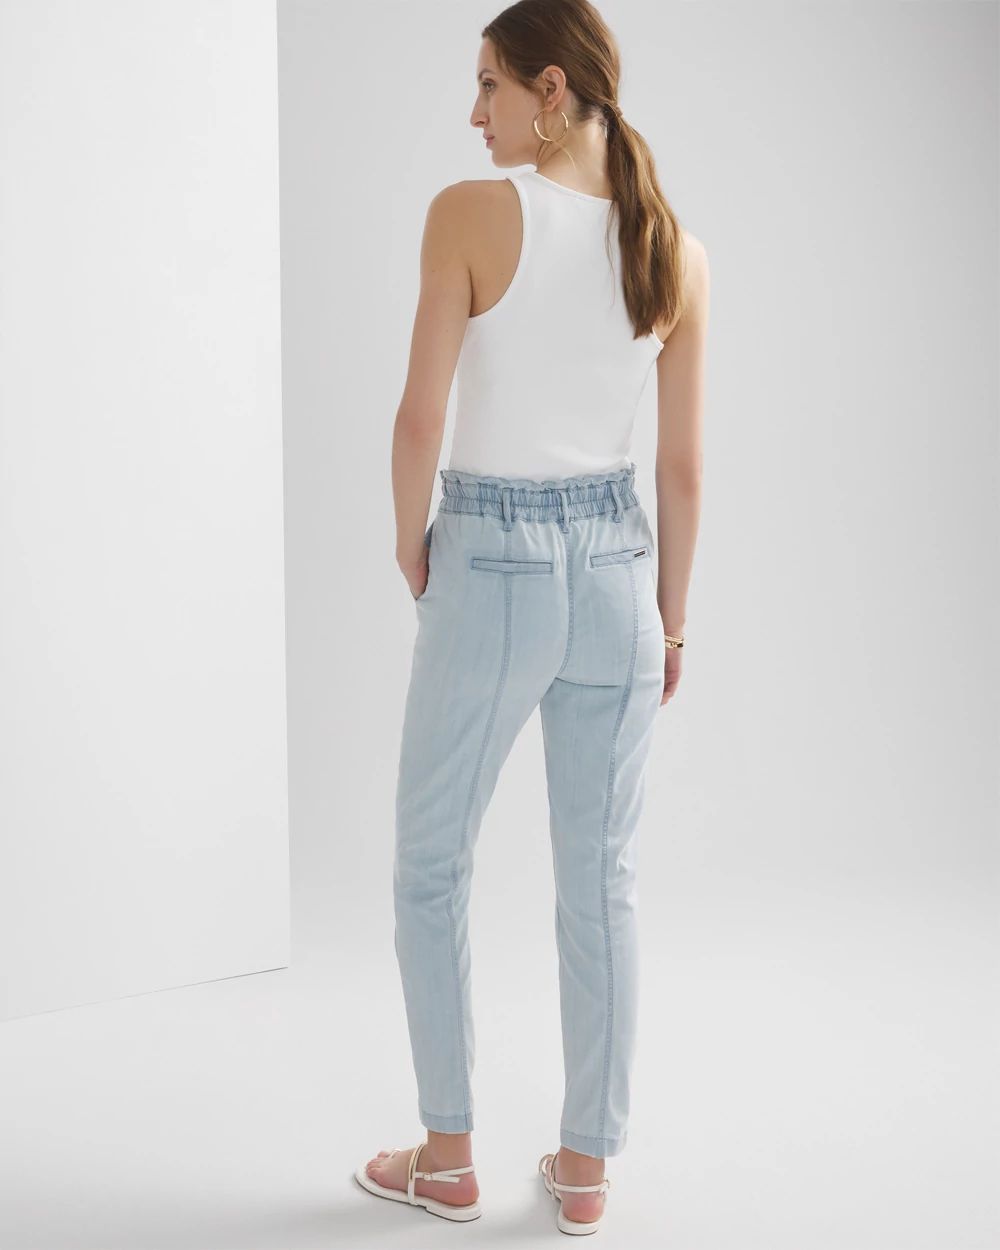 Extra High-Rise Tapered Ankle Jean click to view larger image.